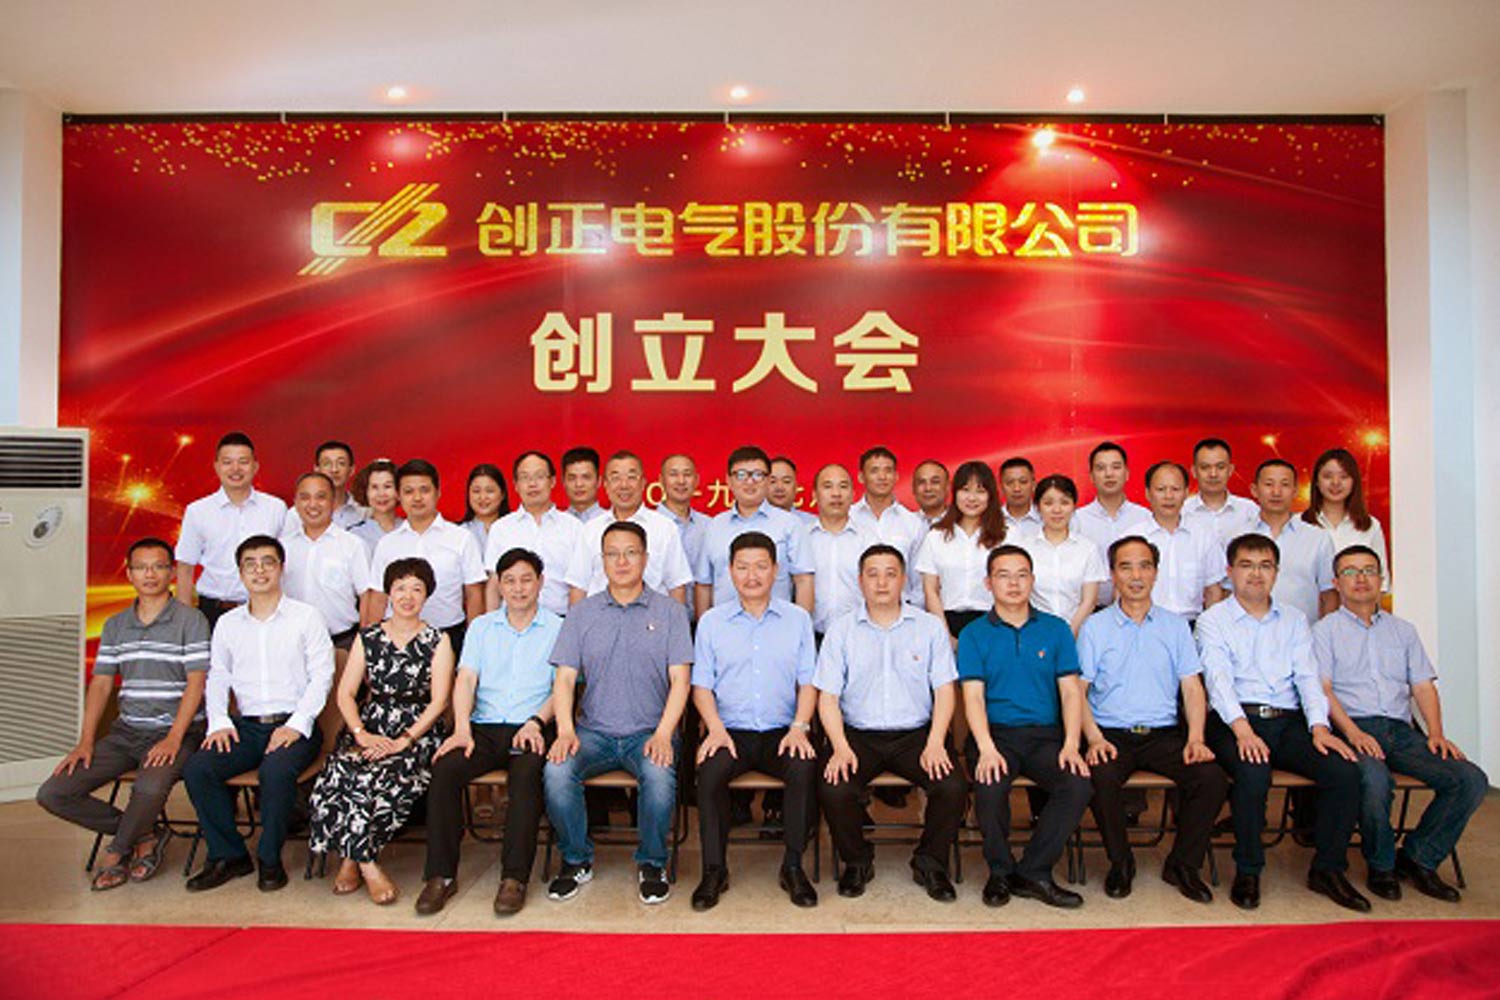 The founding meeting of CZ Electric Co., Ltd. was successfully held